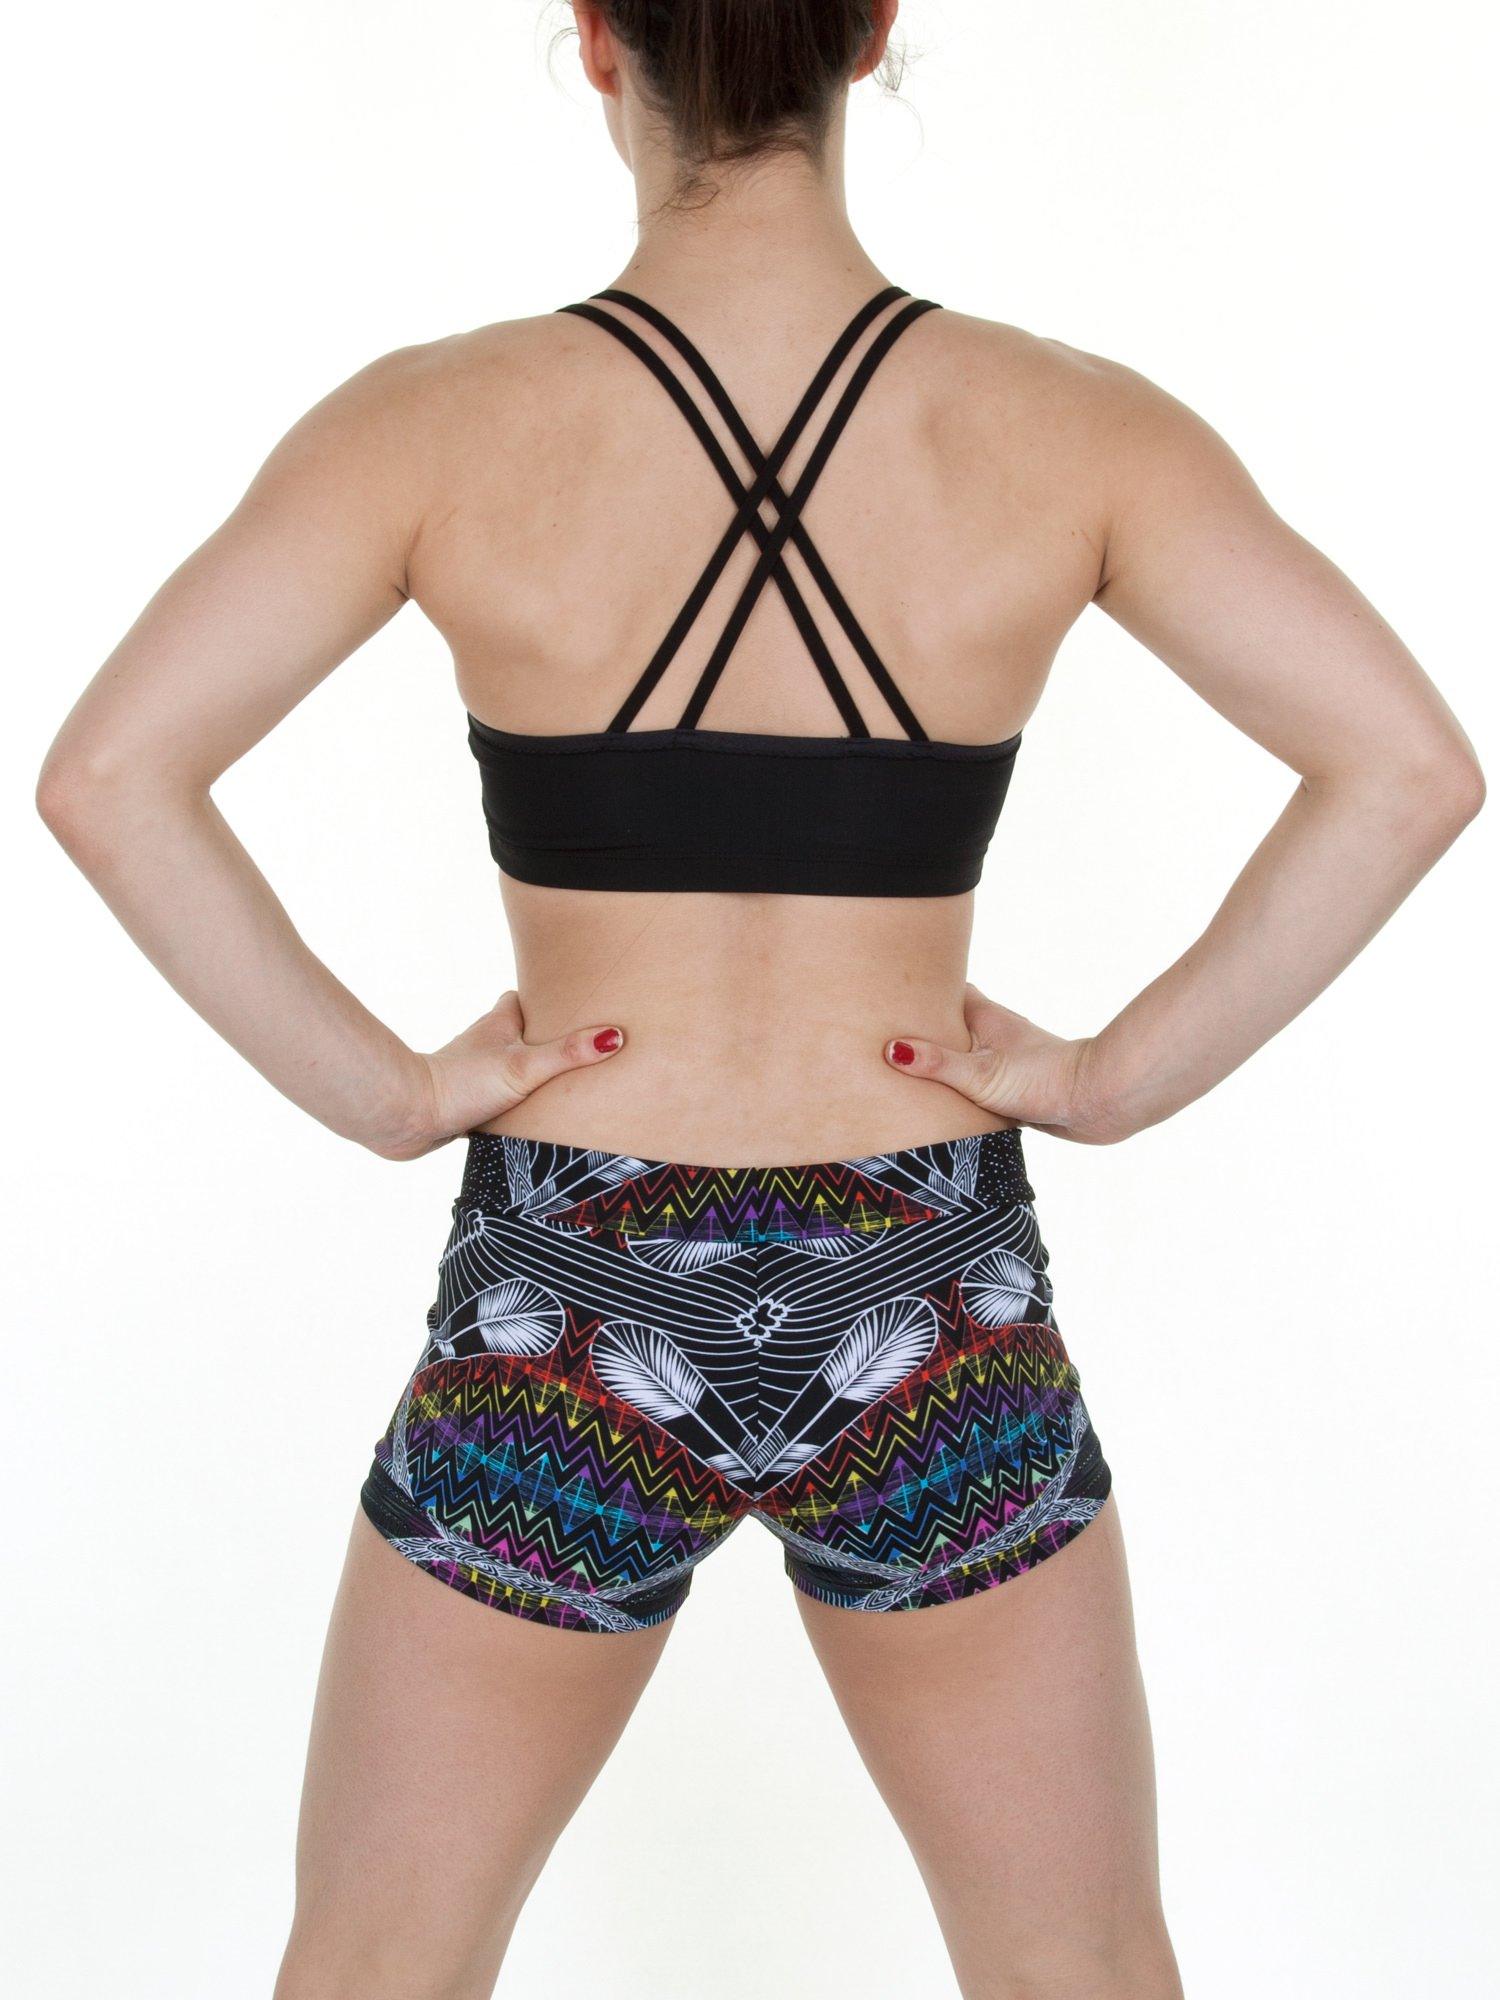 Jalie Pattern 3247 - Cropped Top with criss-cross spaghetti back straps with Low-Rise Shorts